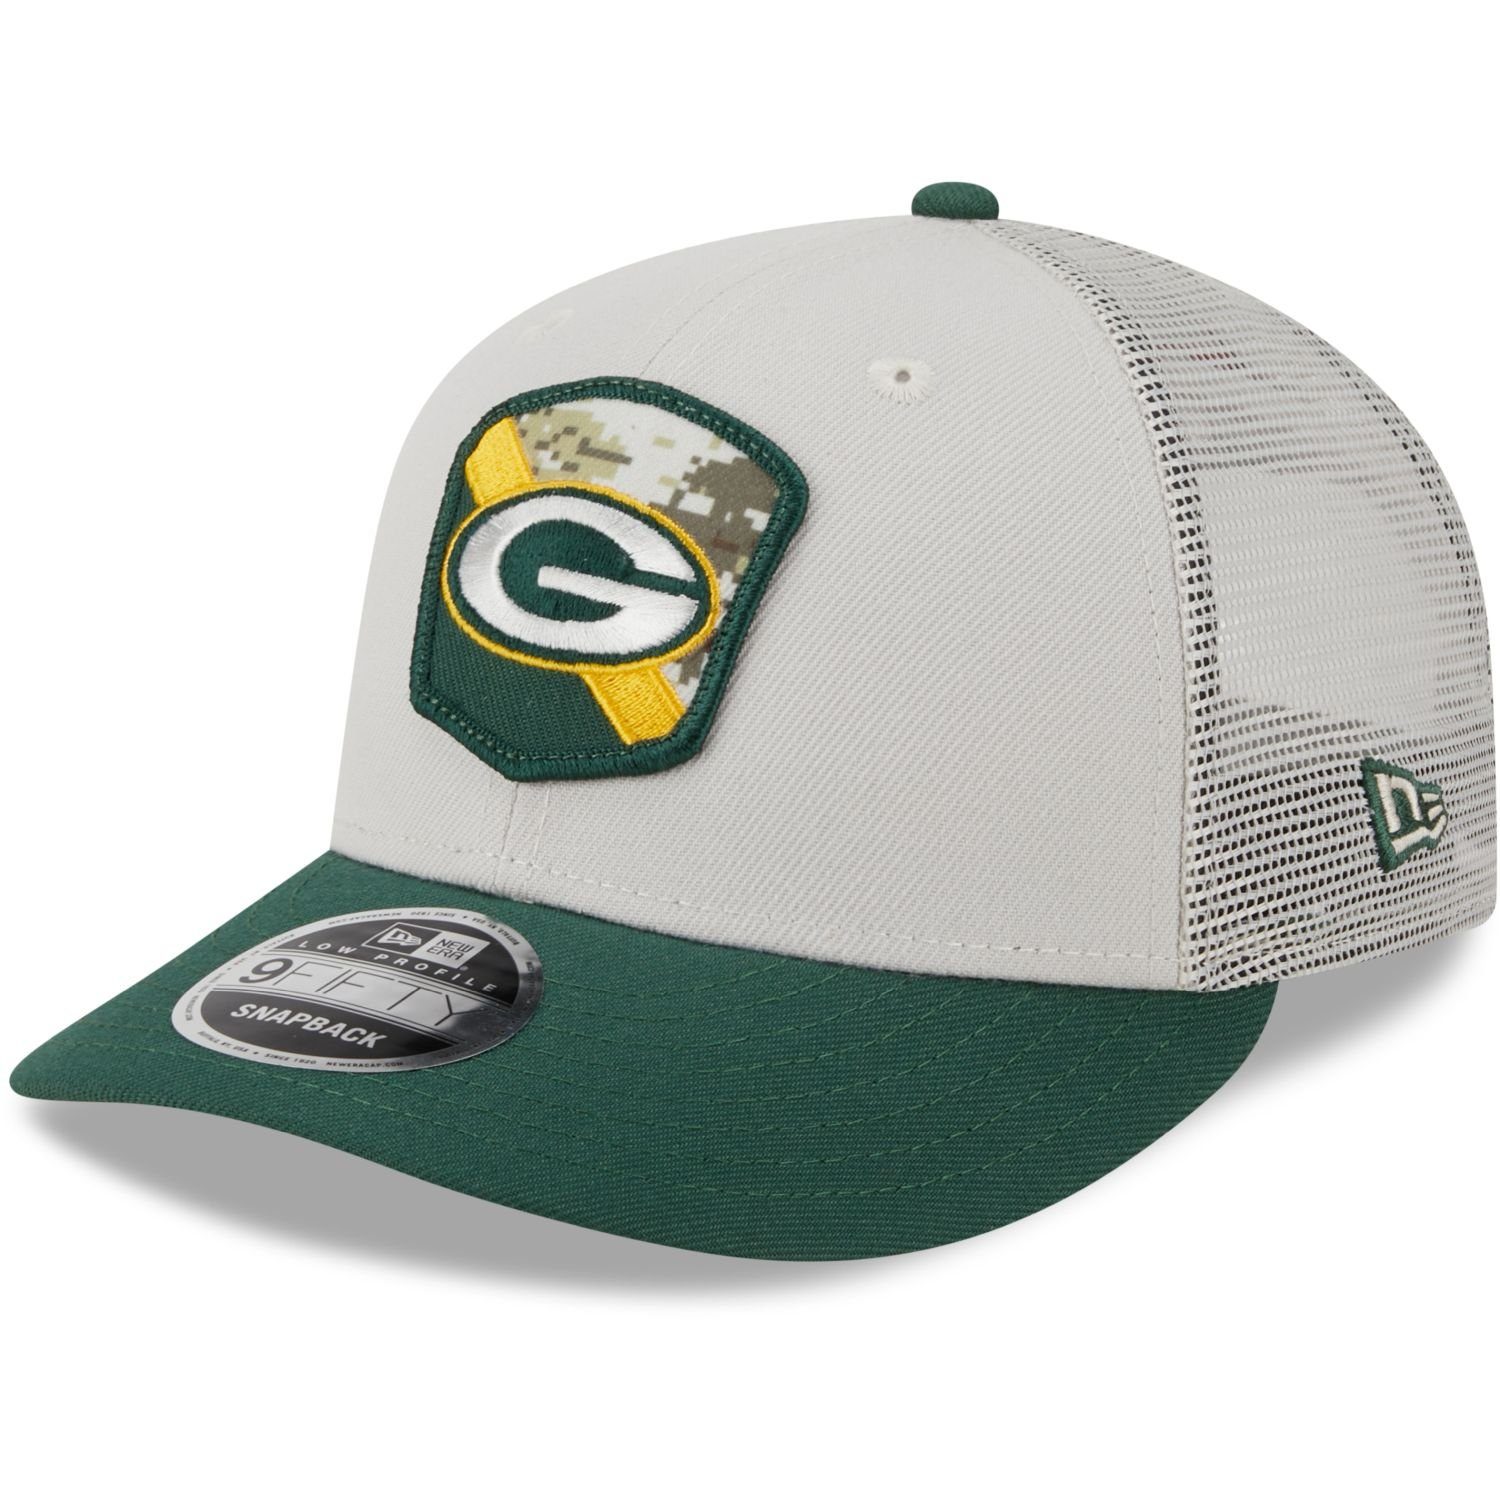 Salute to Packers Service Cap Low Snap Era Snapback New Profile 9Fifty Green Bay NFL